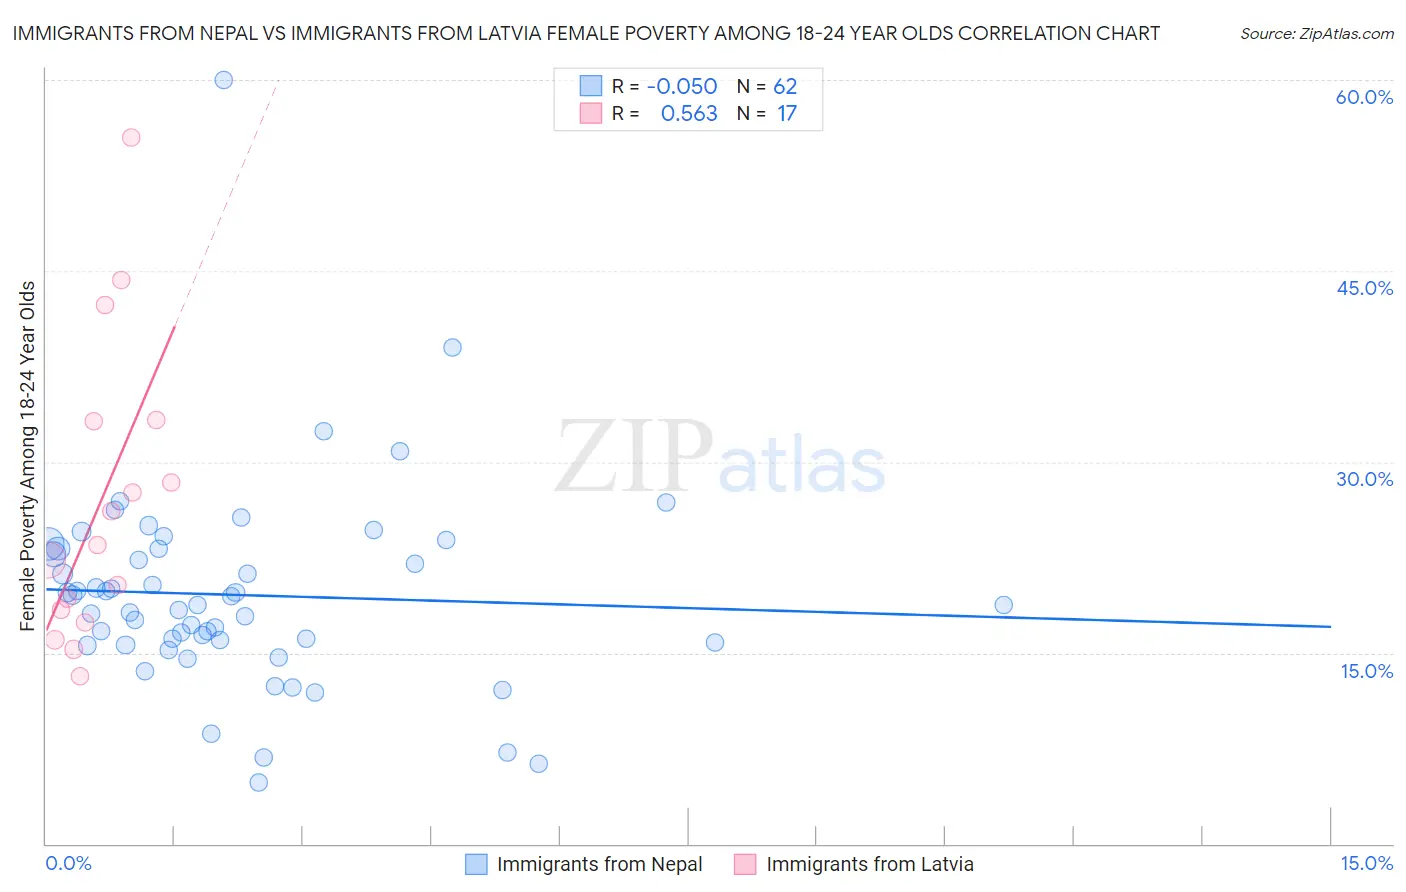 Immigrants from Nepal vs Immigrants from Latvia Female Poverty Among 18-24 Year Olds